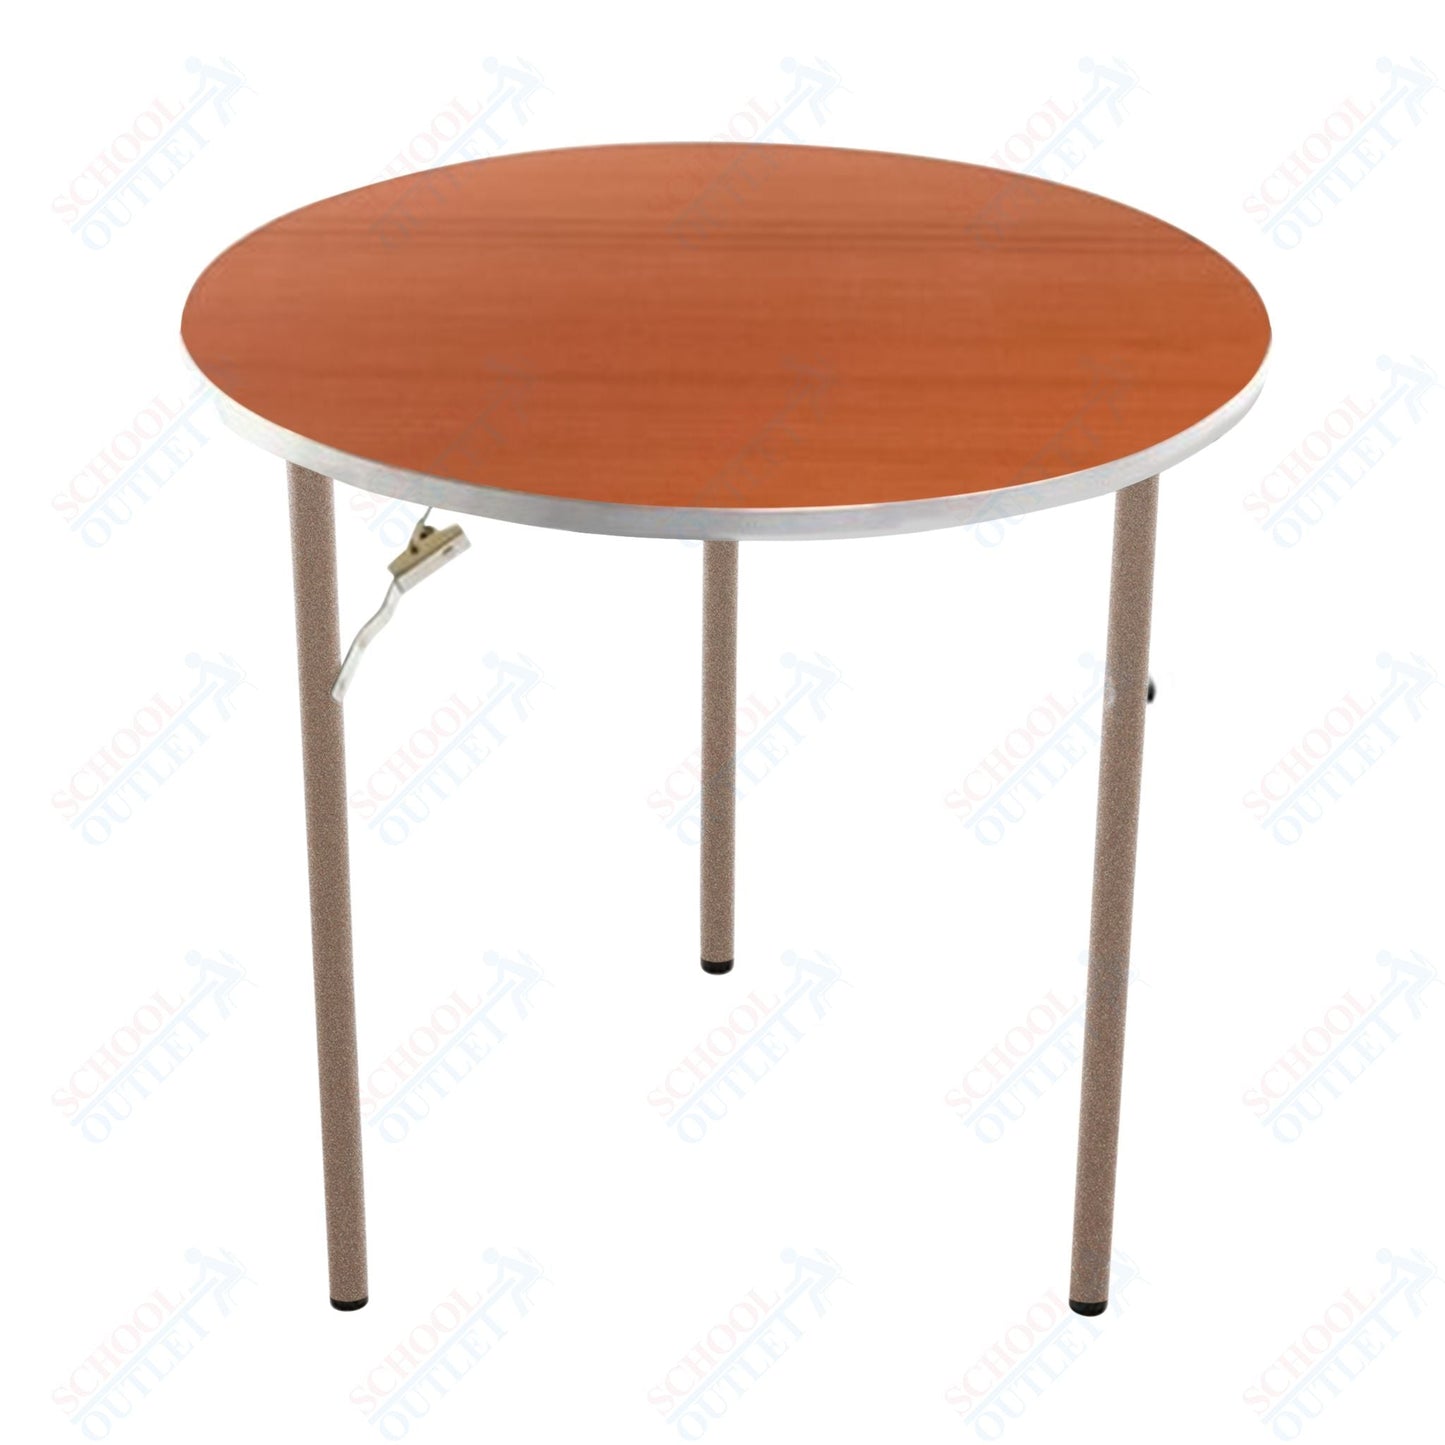 AmTab Folding Table - Plywood Stained and Sealed - Aluminum Edge - Round - 54" Diameter x 29"H (AmTab AMT - R54PA) - SchoolOutlet